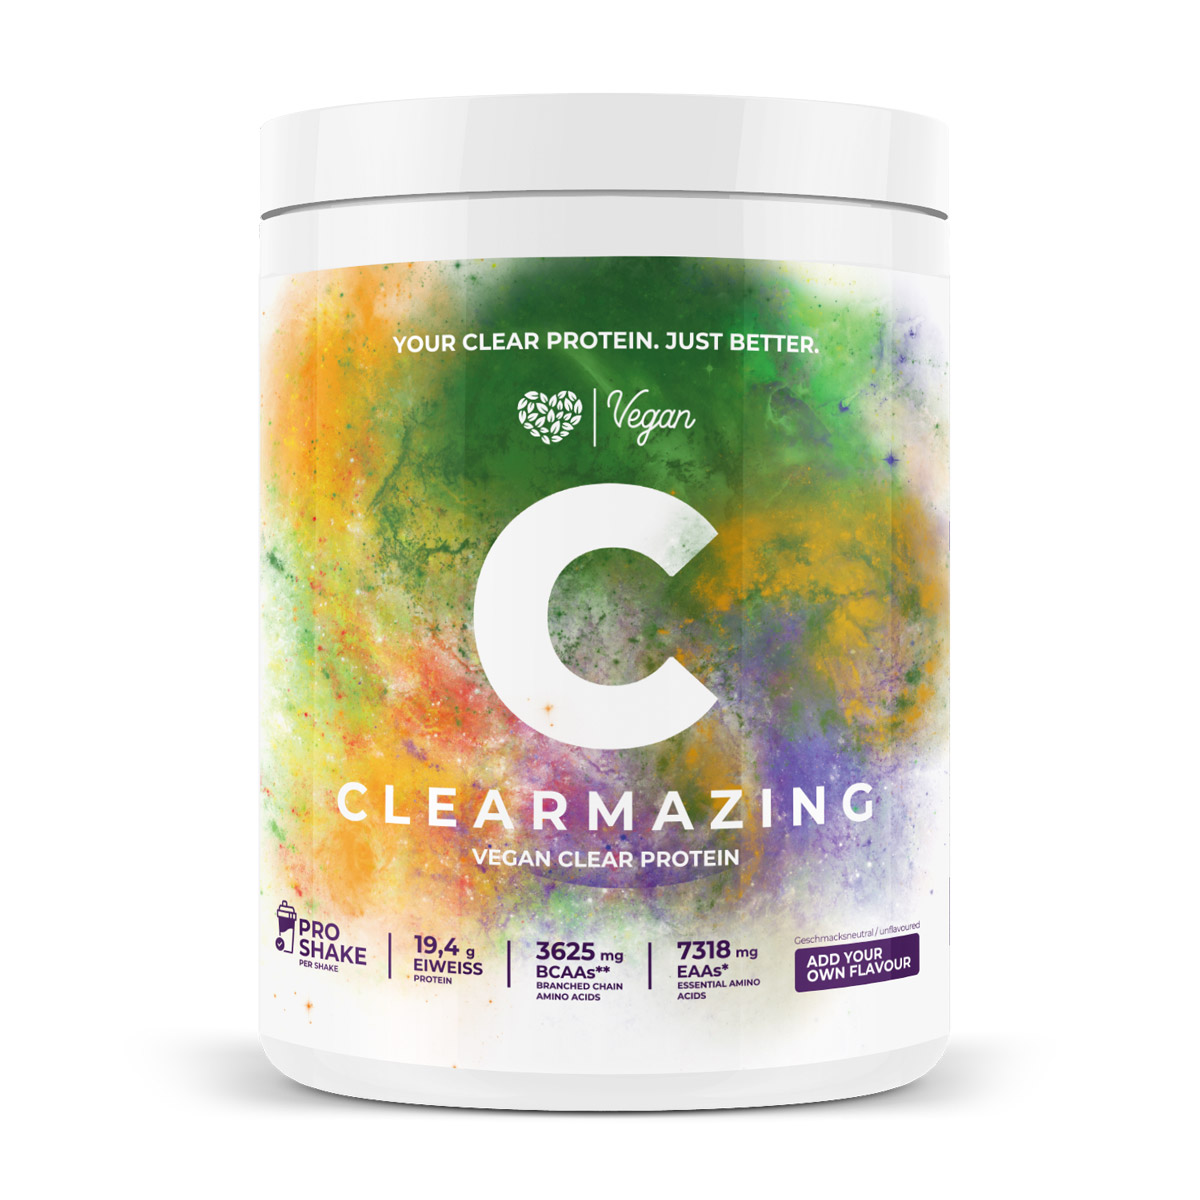 CLEARMAZING-CLEAR-VEGAN-PROTEIN-ISOLAT-Packshot-FRONT